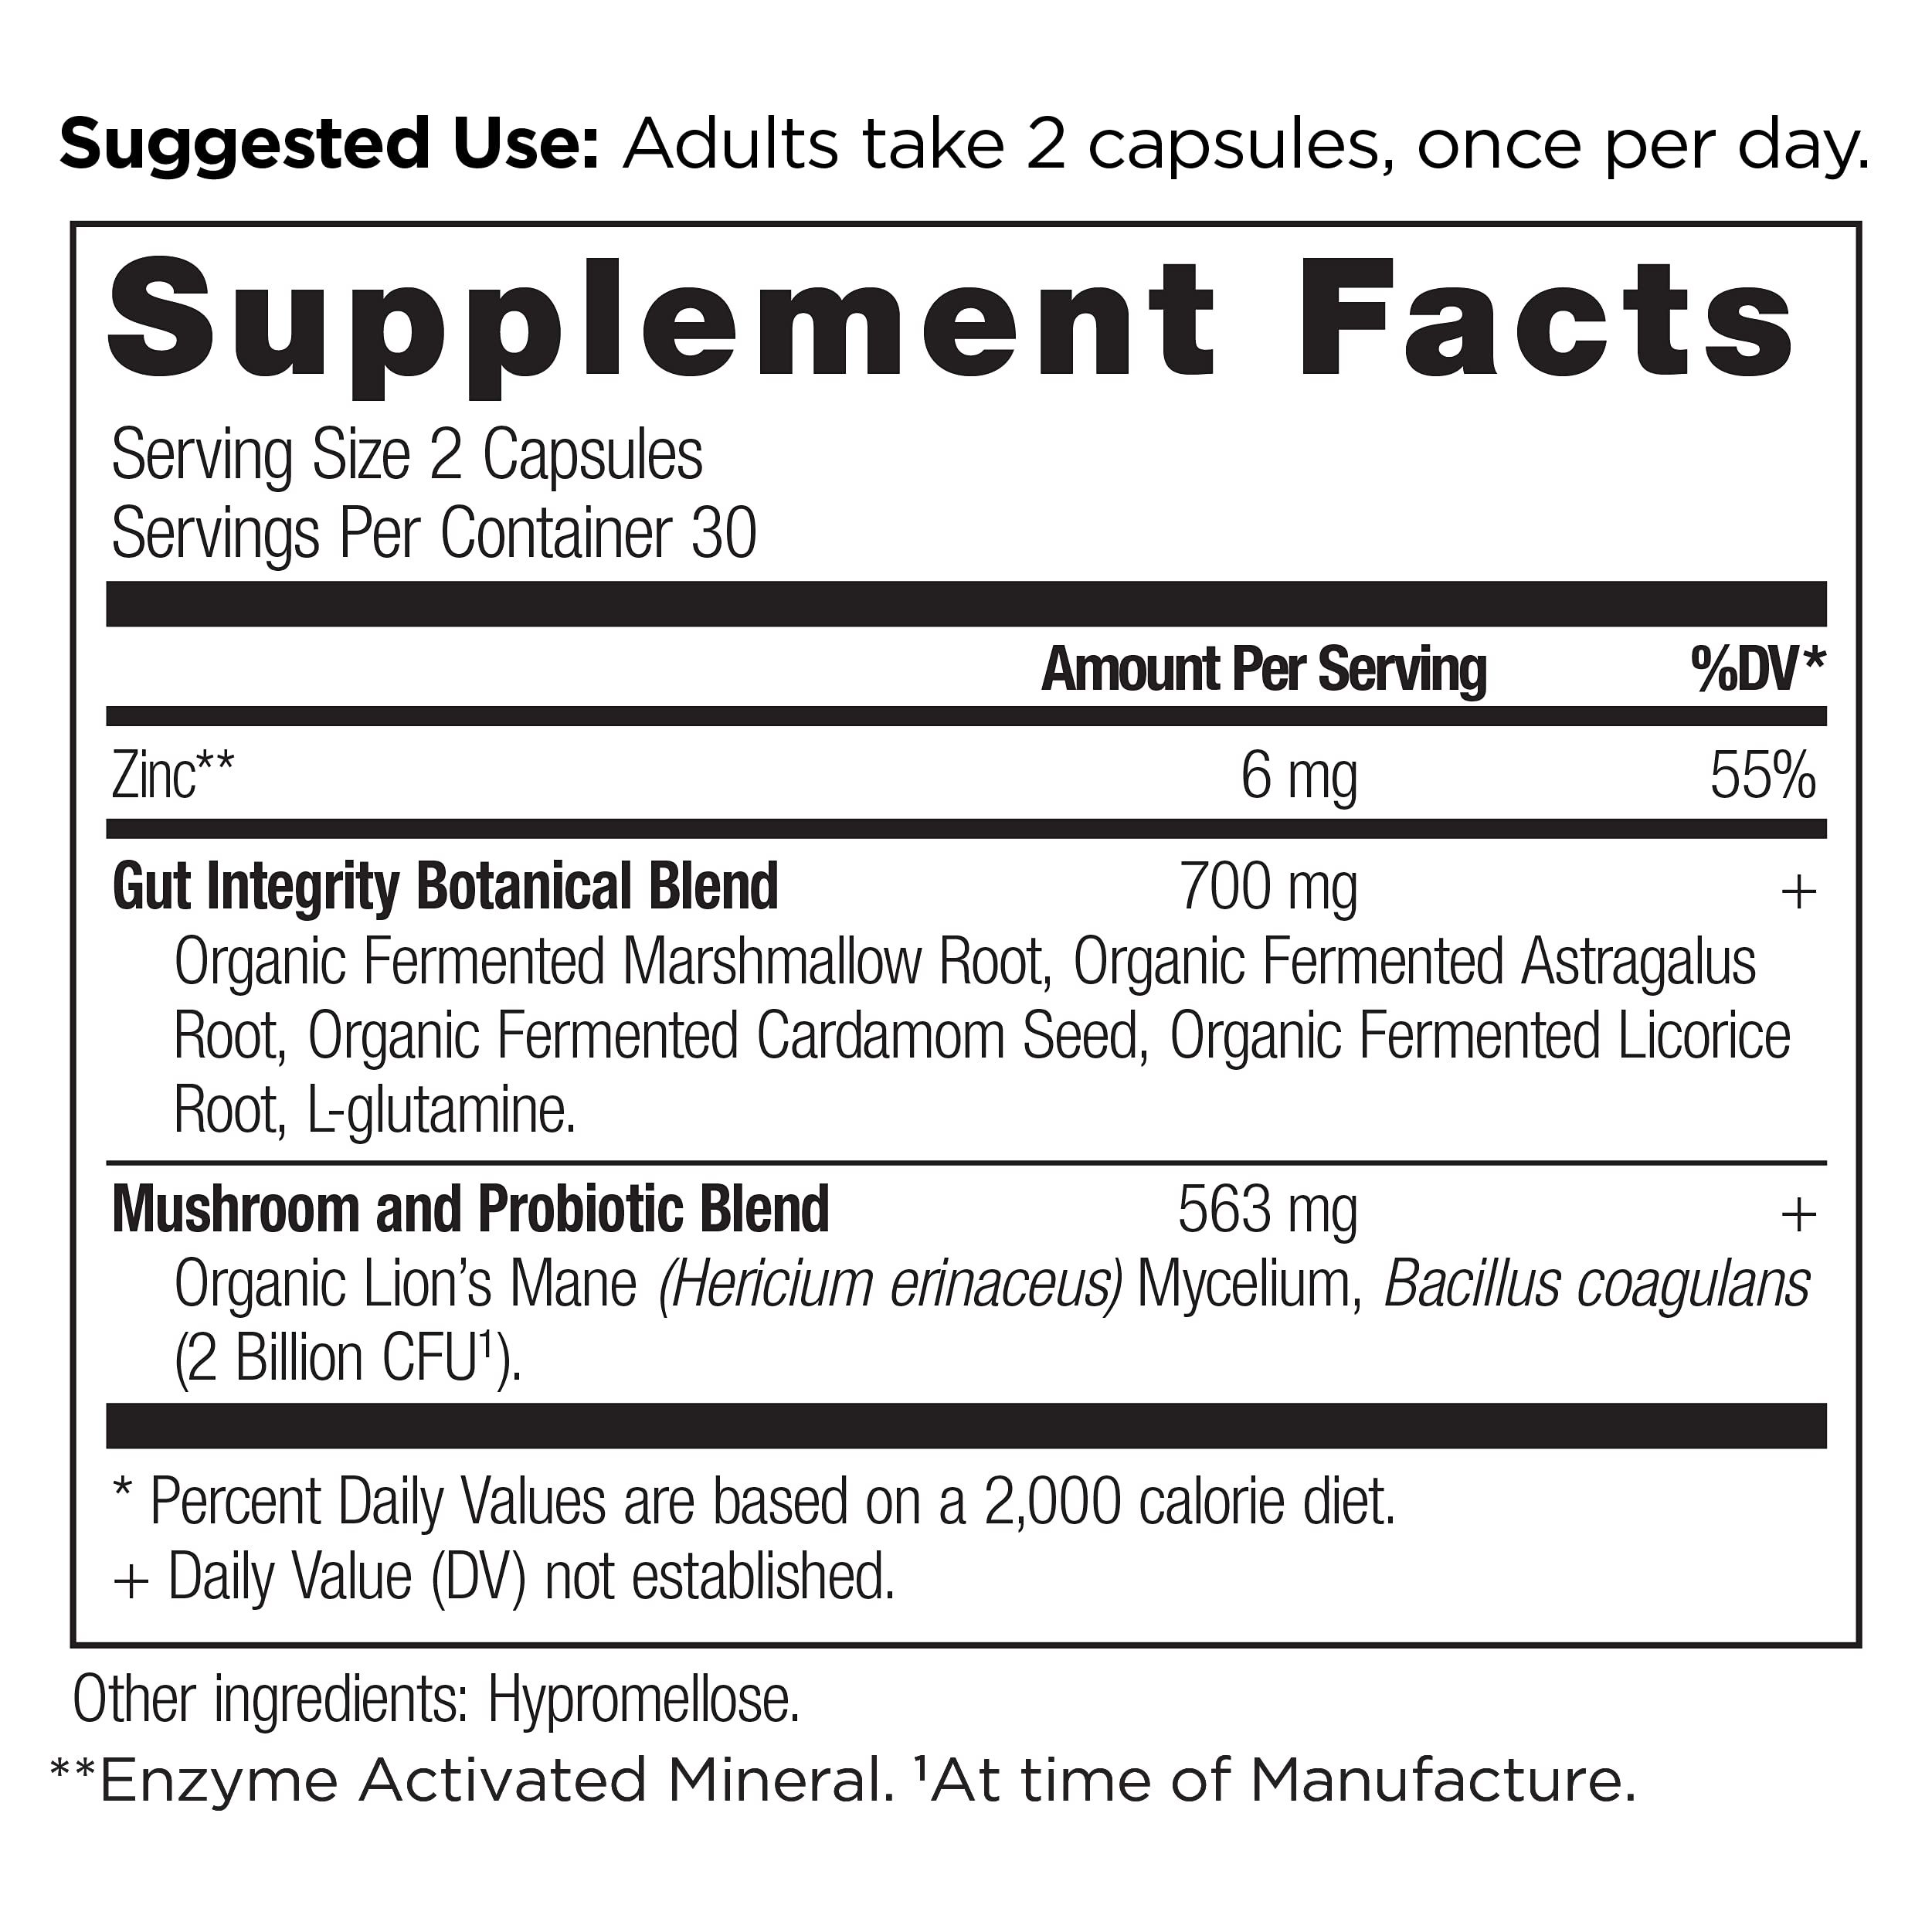 Ancient Nutrition Gut Health Supplement Leaky Gut Capsules, 60ctFormulated with Licorice Root, Astragalus, Marshmallow, and L-Glutamine, Gluten Free, Paleo and Keto Friendly, 60 Ct